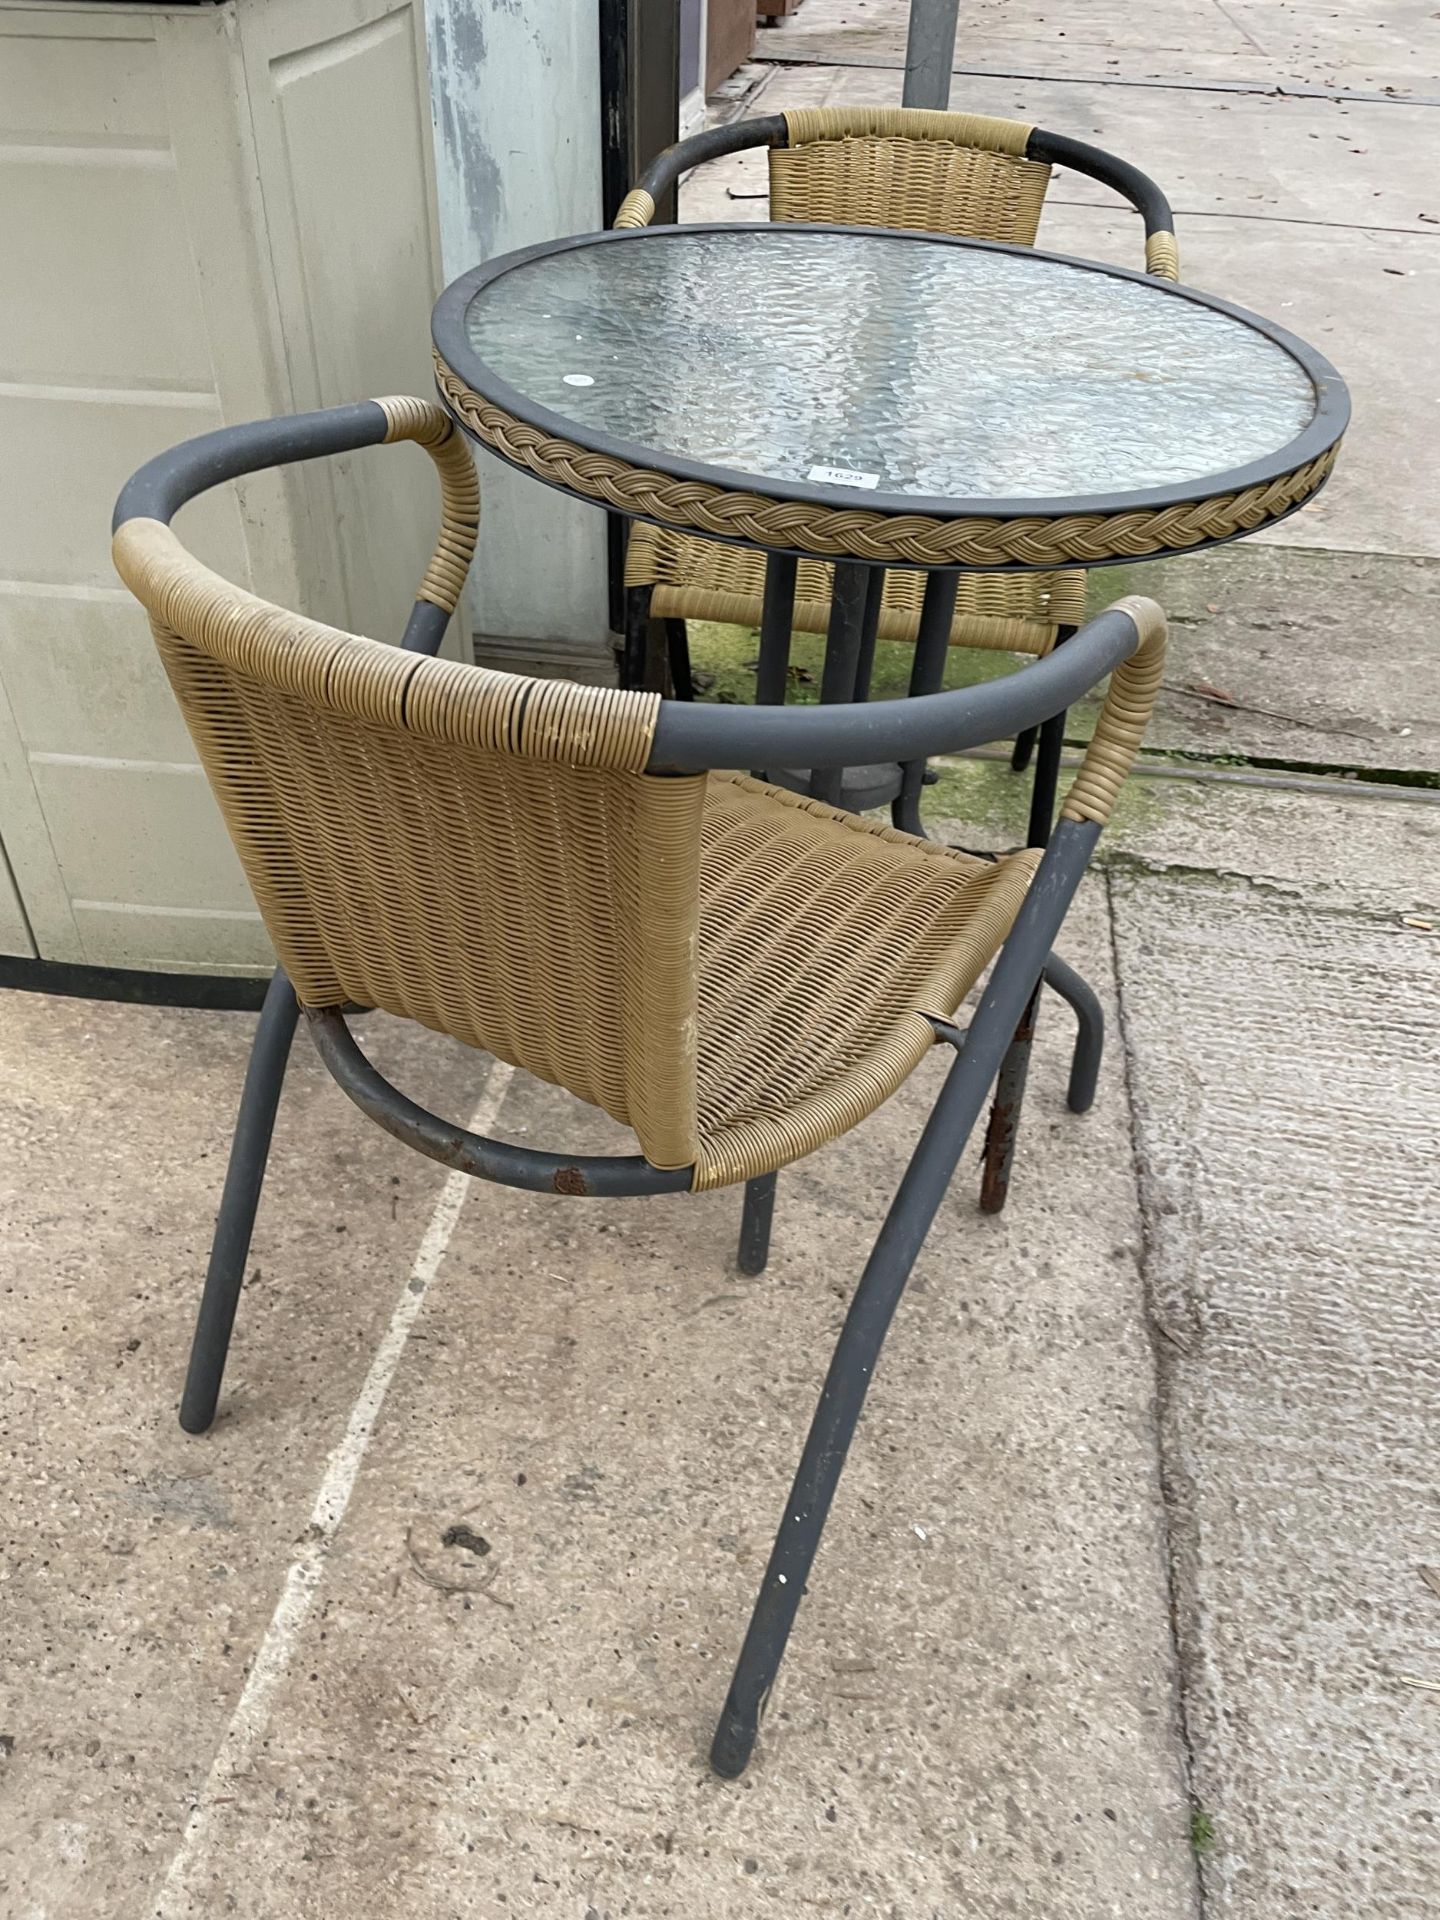 A GLASS TOPPED BISTRO TABLE AND TWO RATTAN EFFECT CHAIRS - Image 3 of 3